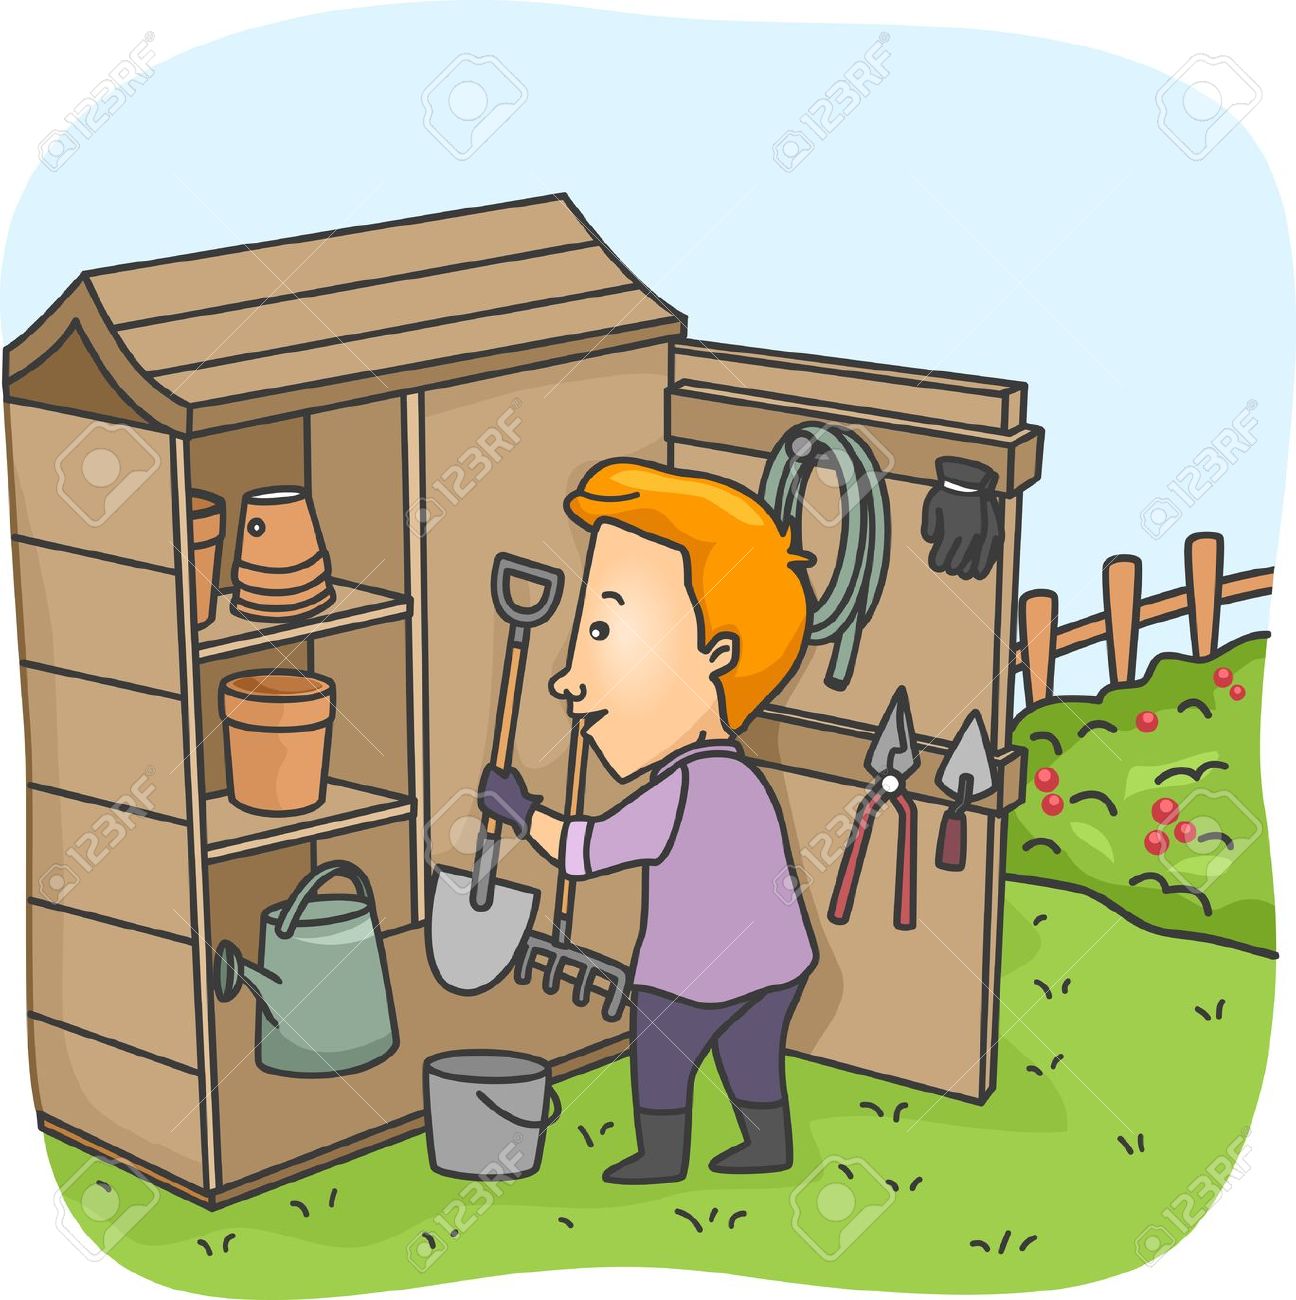 clipart garden shed - photo #30